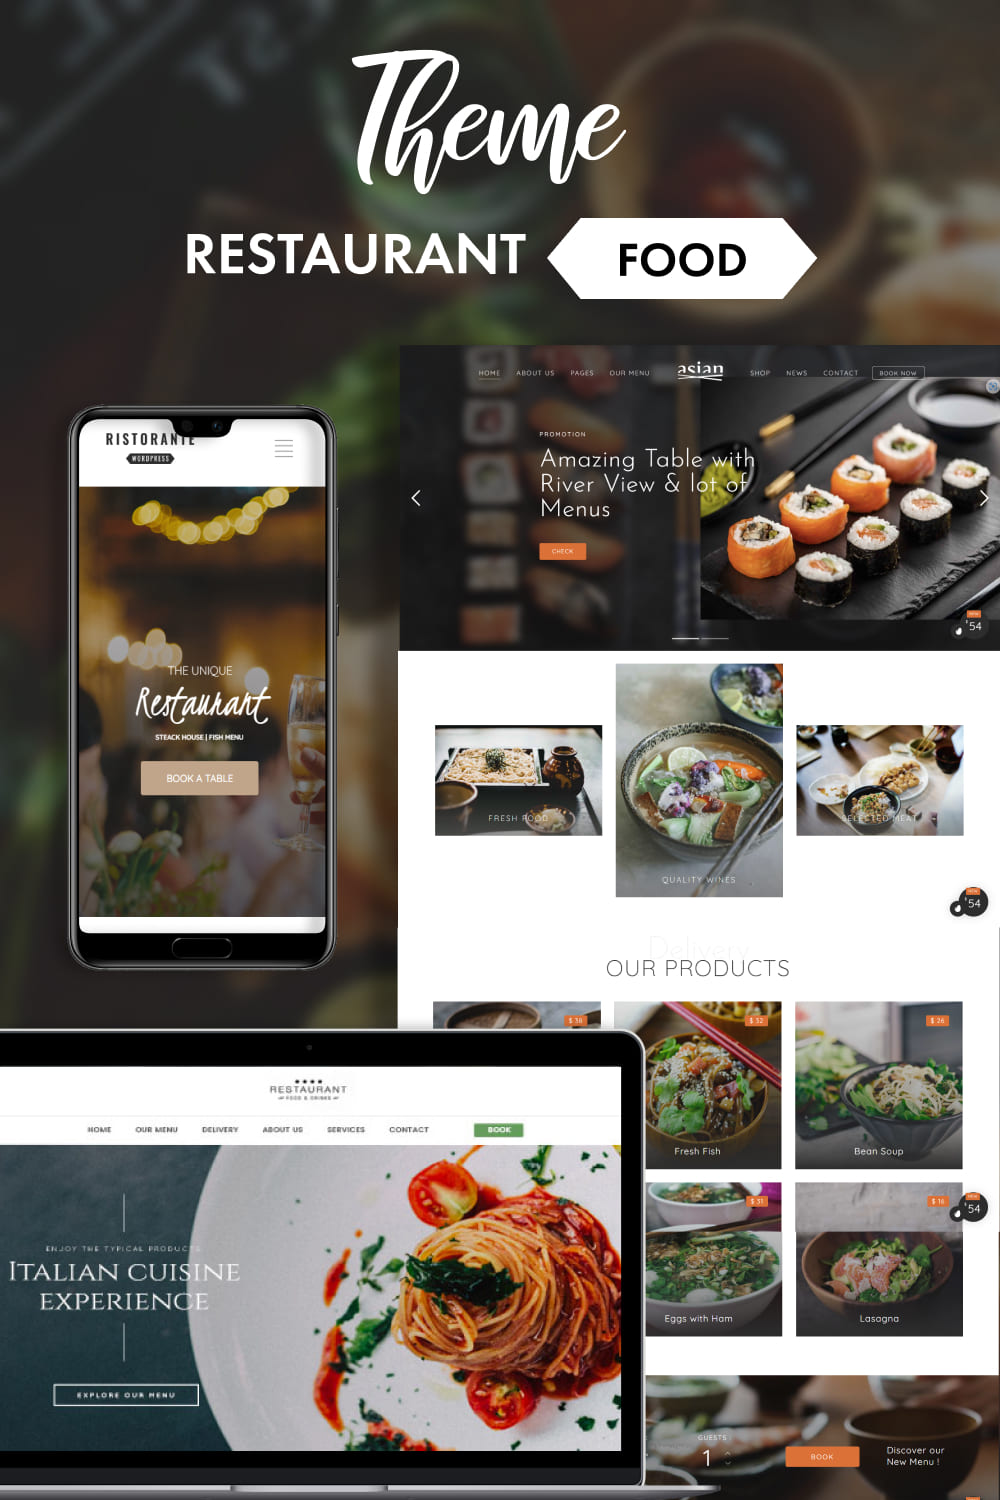 A selection of beautiful images of WordPress pages on a restaurant theme.